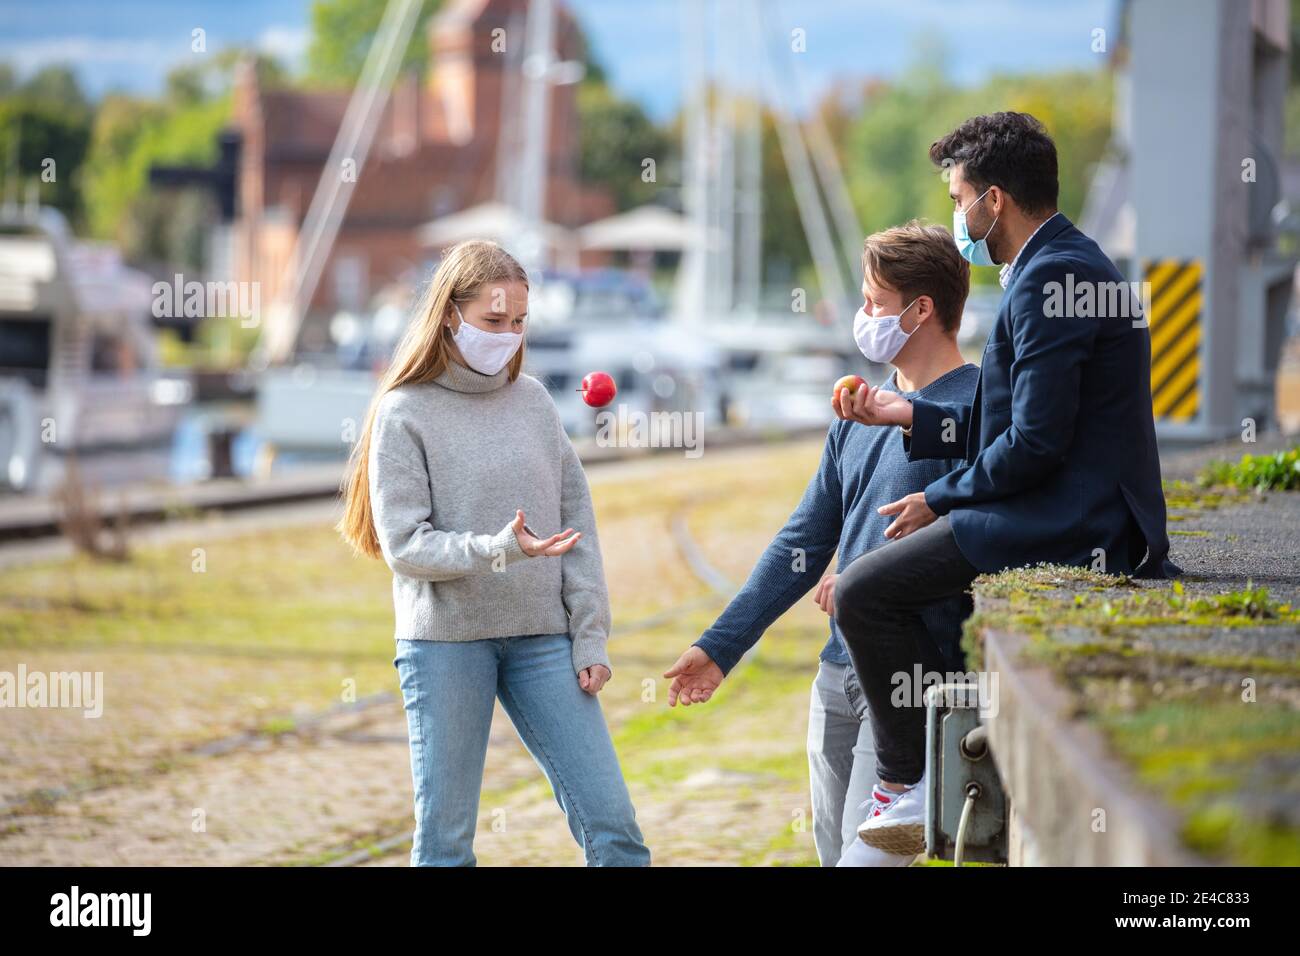 Two men and a woman in Corona time, with everyday masks, out and about in the city. Leisure time with mask outdoors. Stock Photo